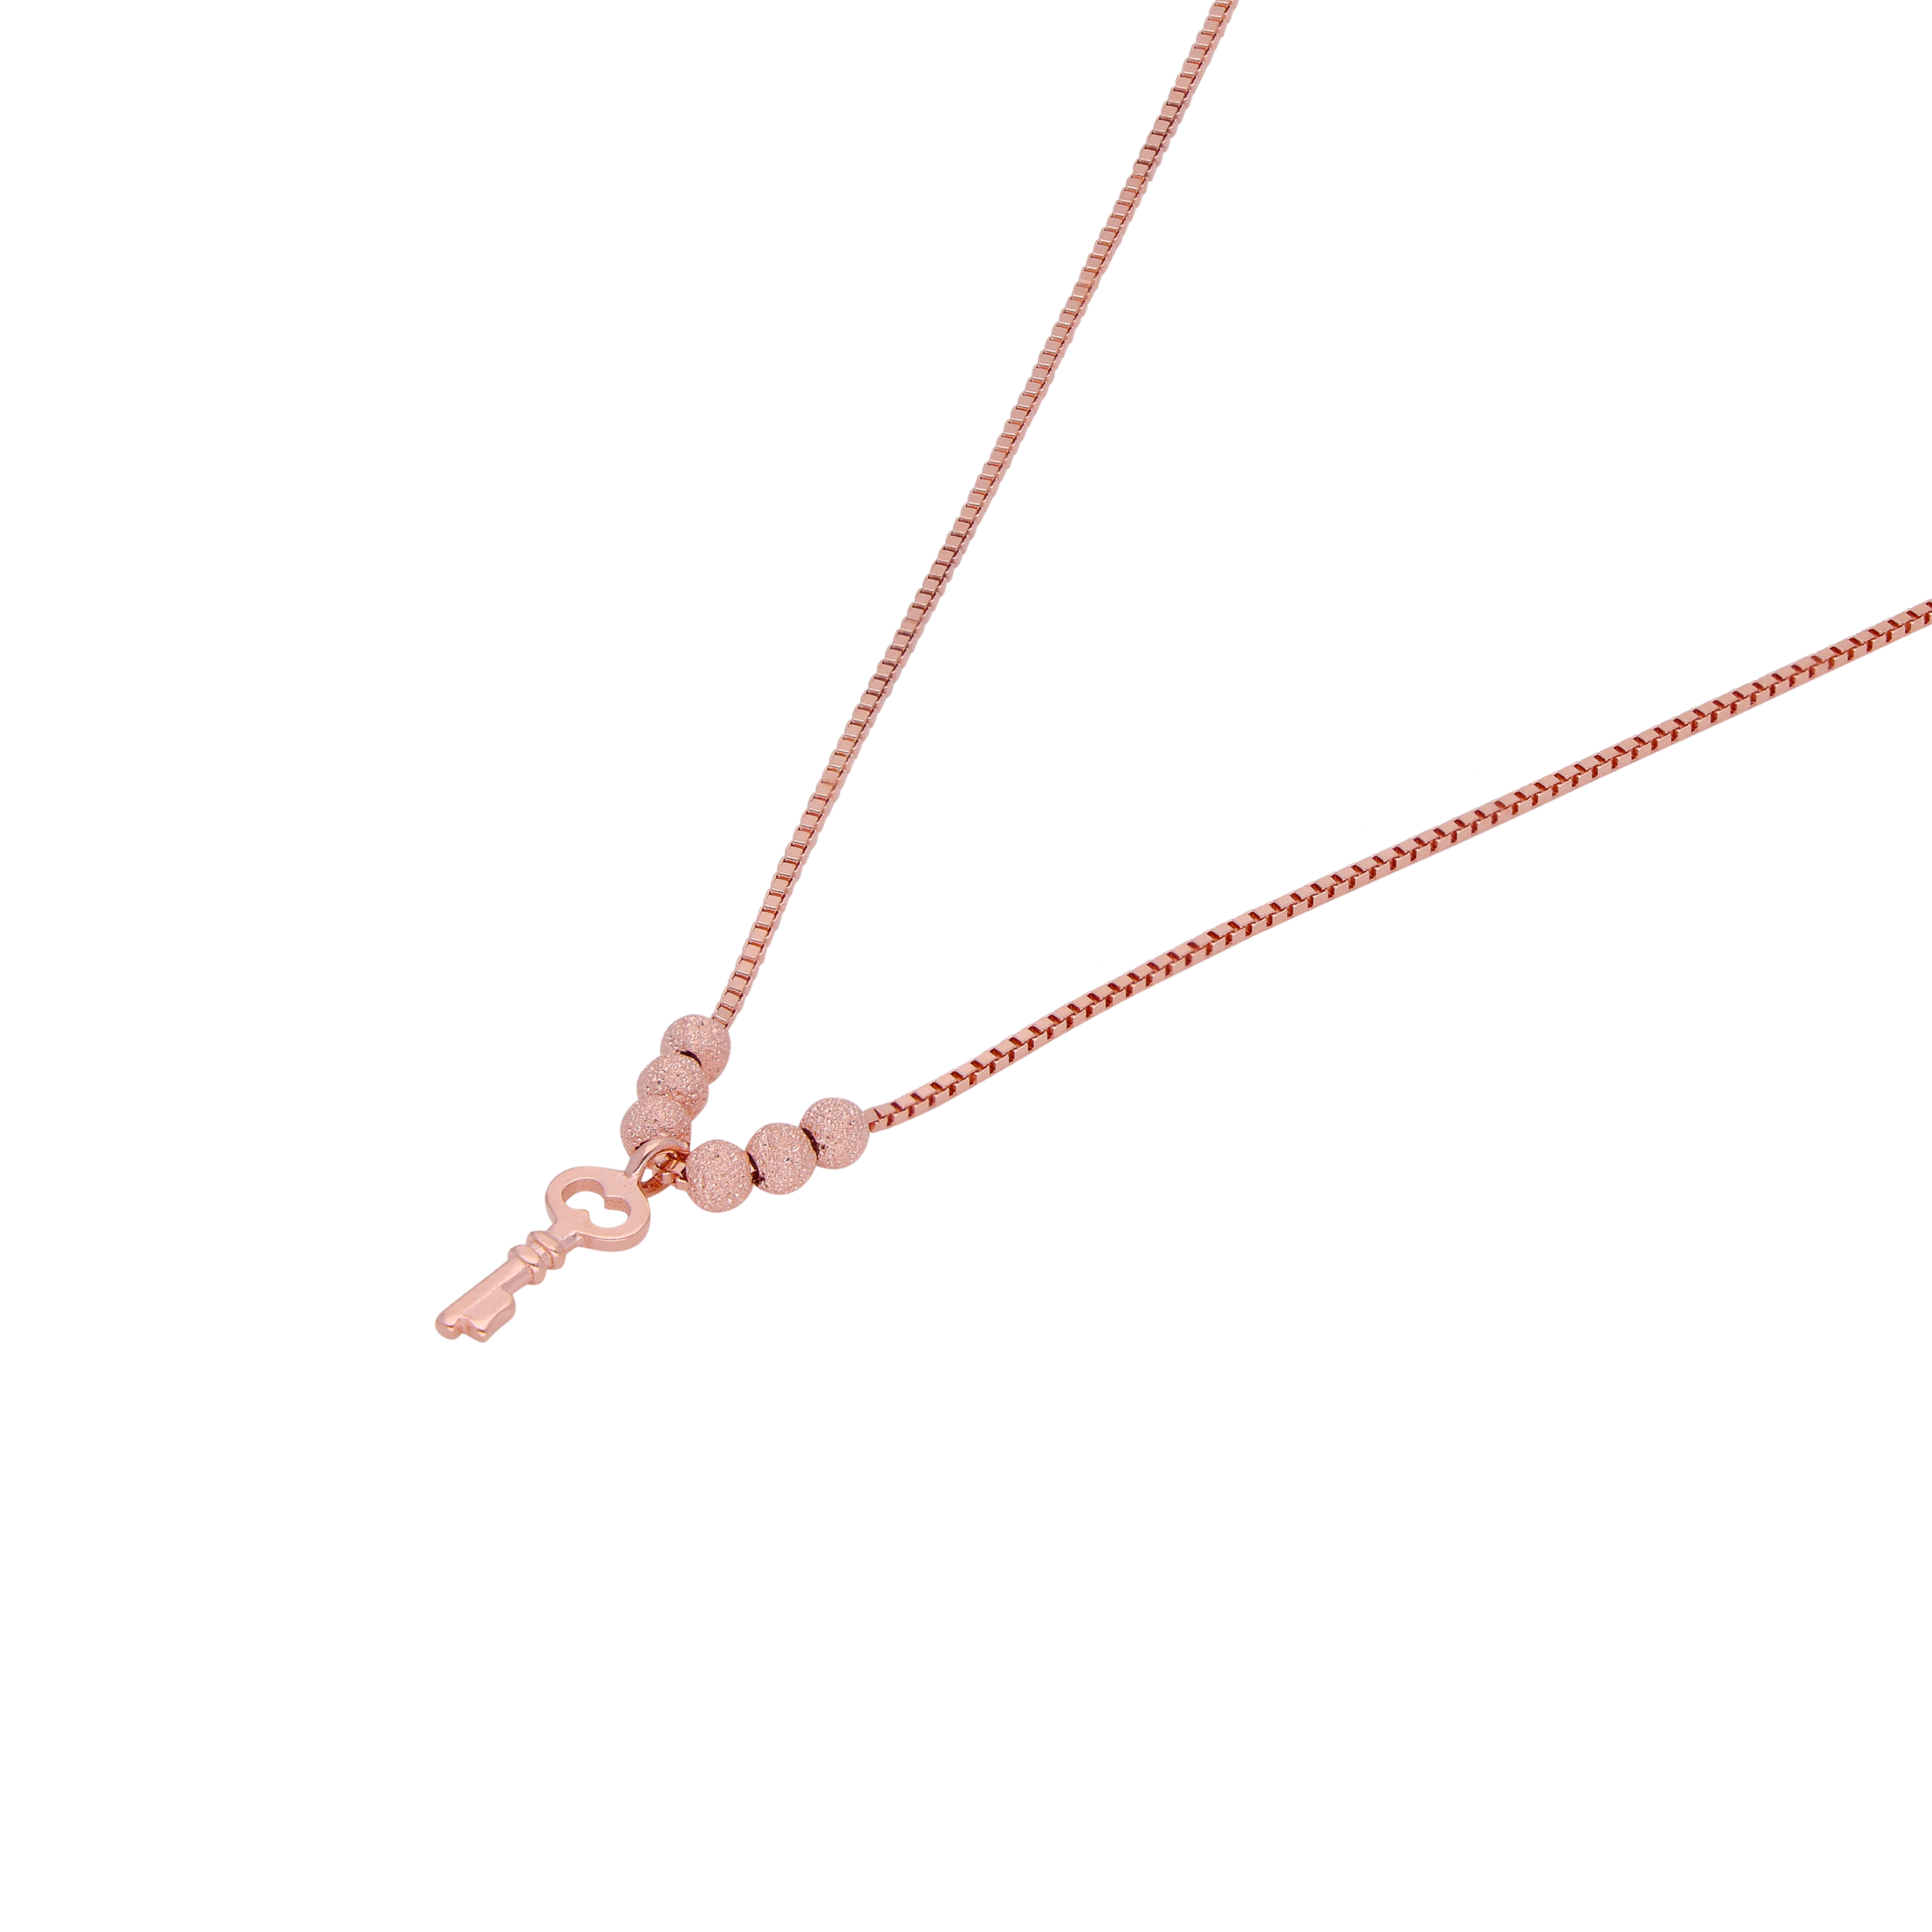 Key Pendant Chain with Rose Gold Finish | SKU: 0019281667, 0019281629